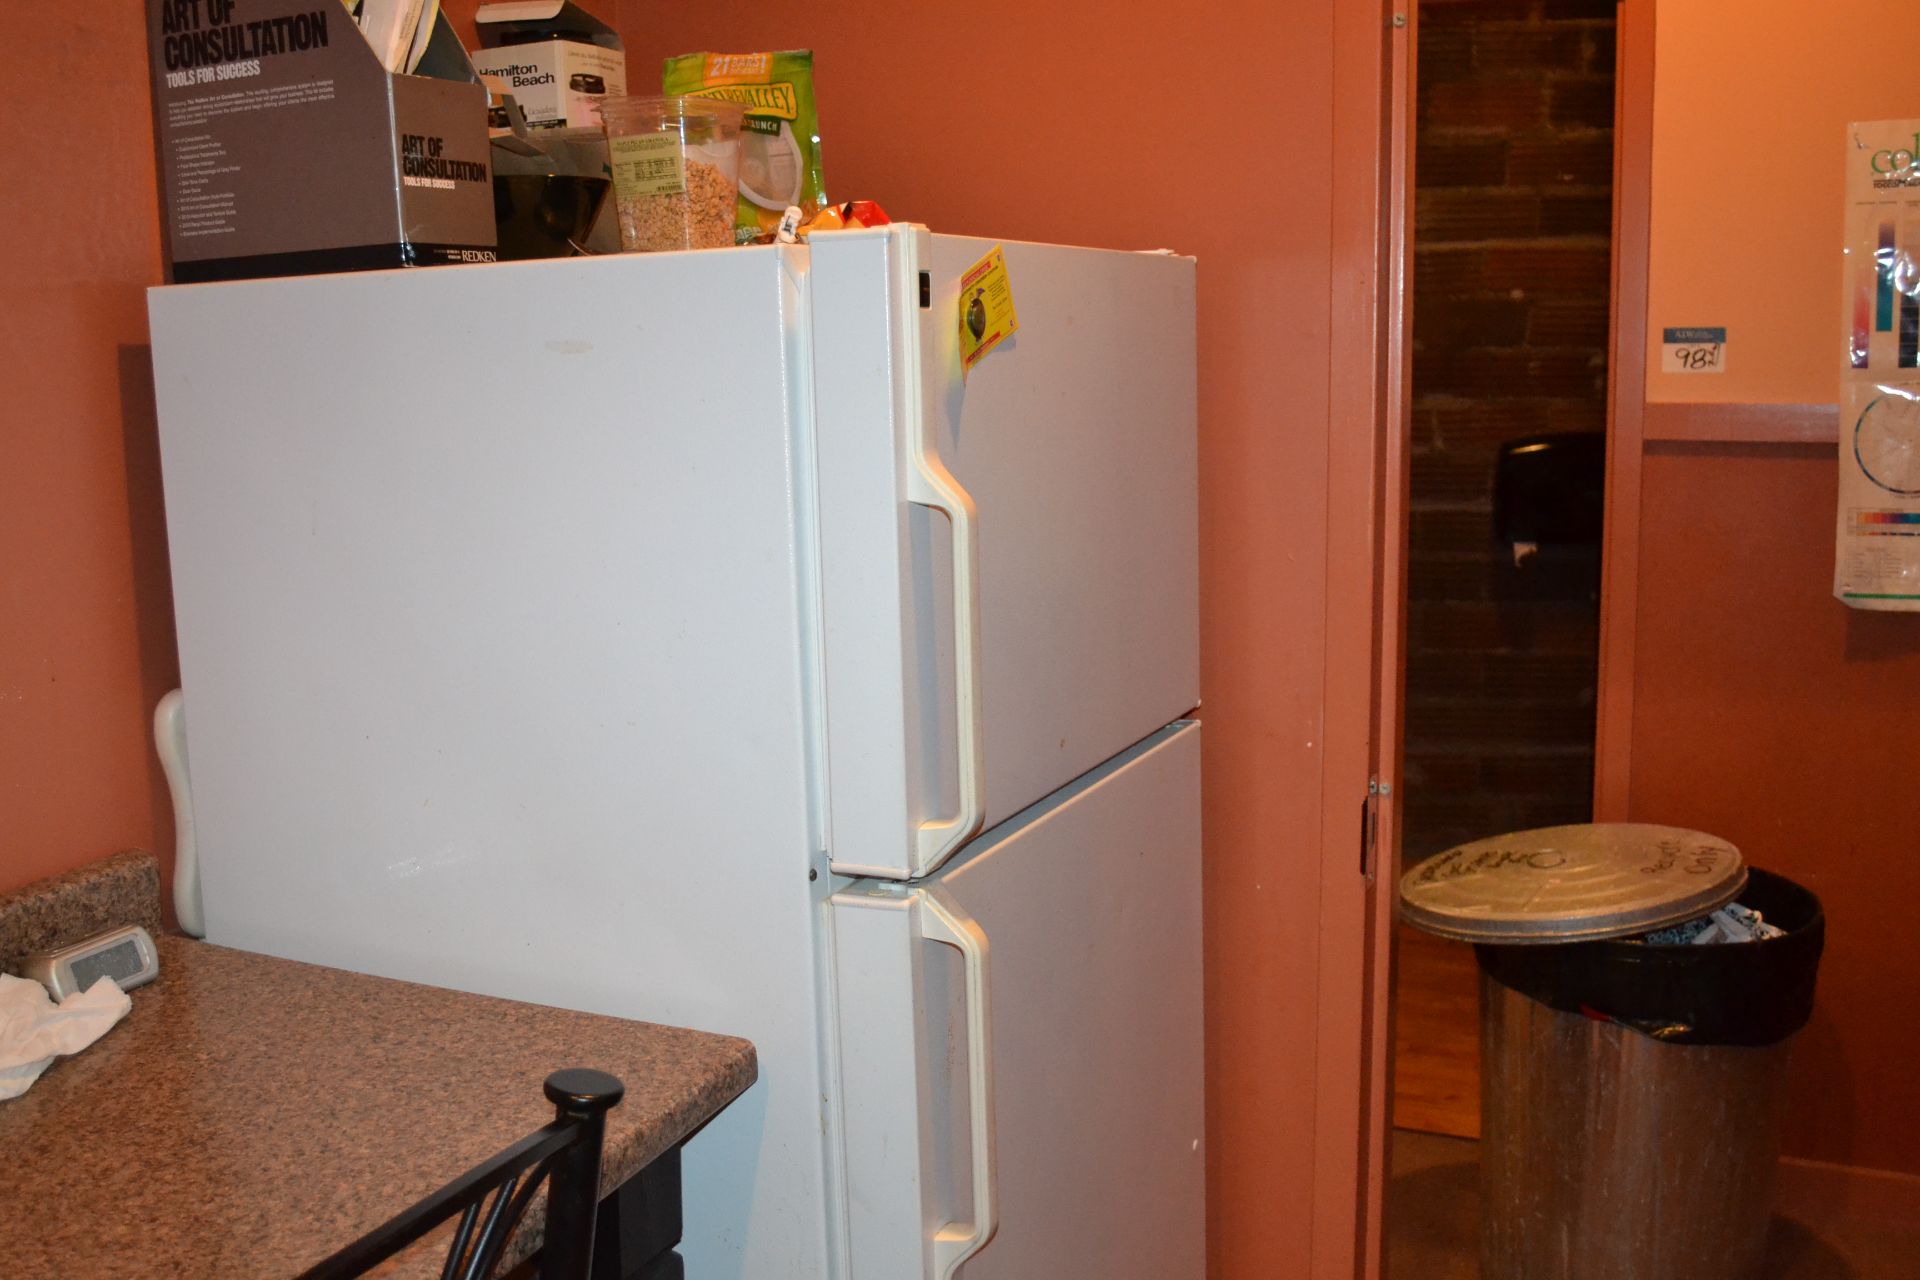 Contents of Breakroom: Fridge, Countertop, Table, Chairs & microwave - Image 4 of 4